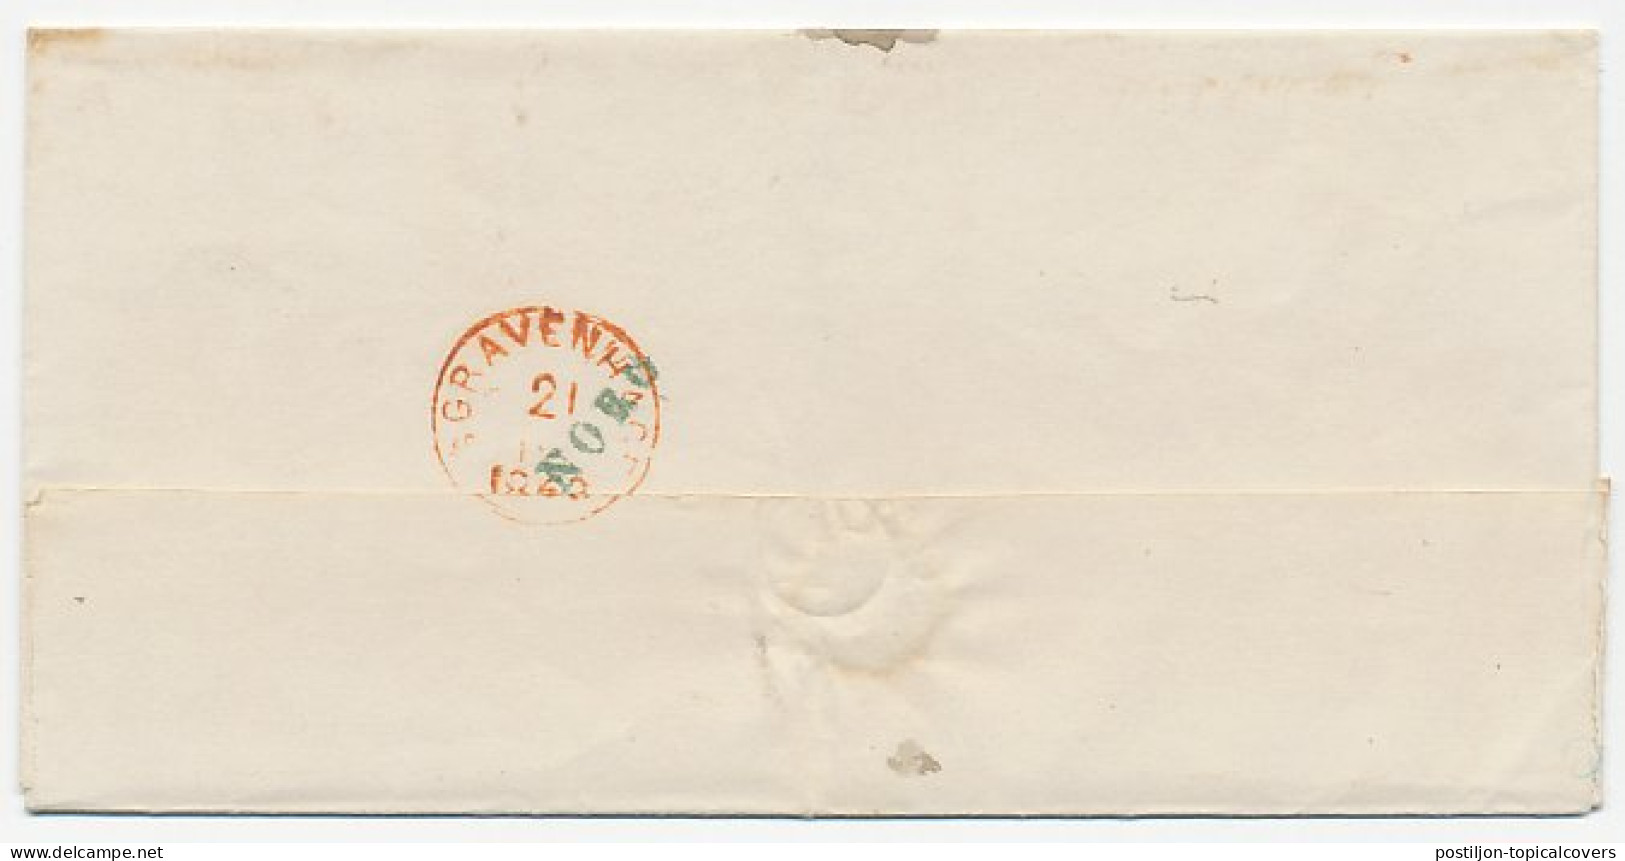 Naamstempel Norg 1863 - Covers & Documents